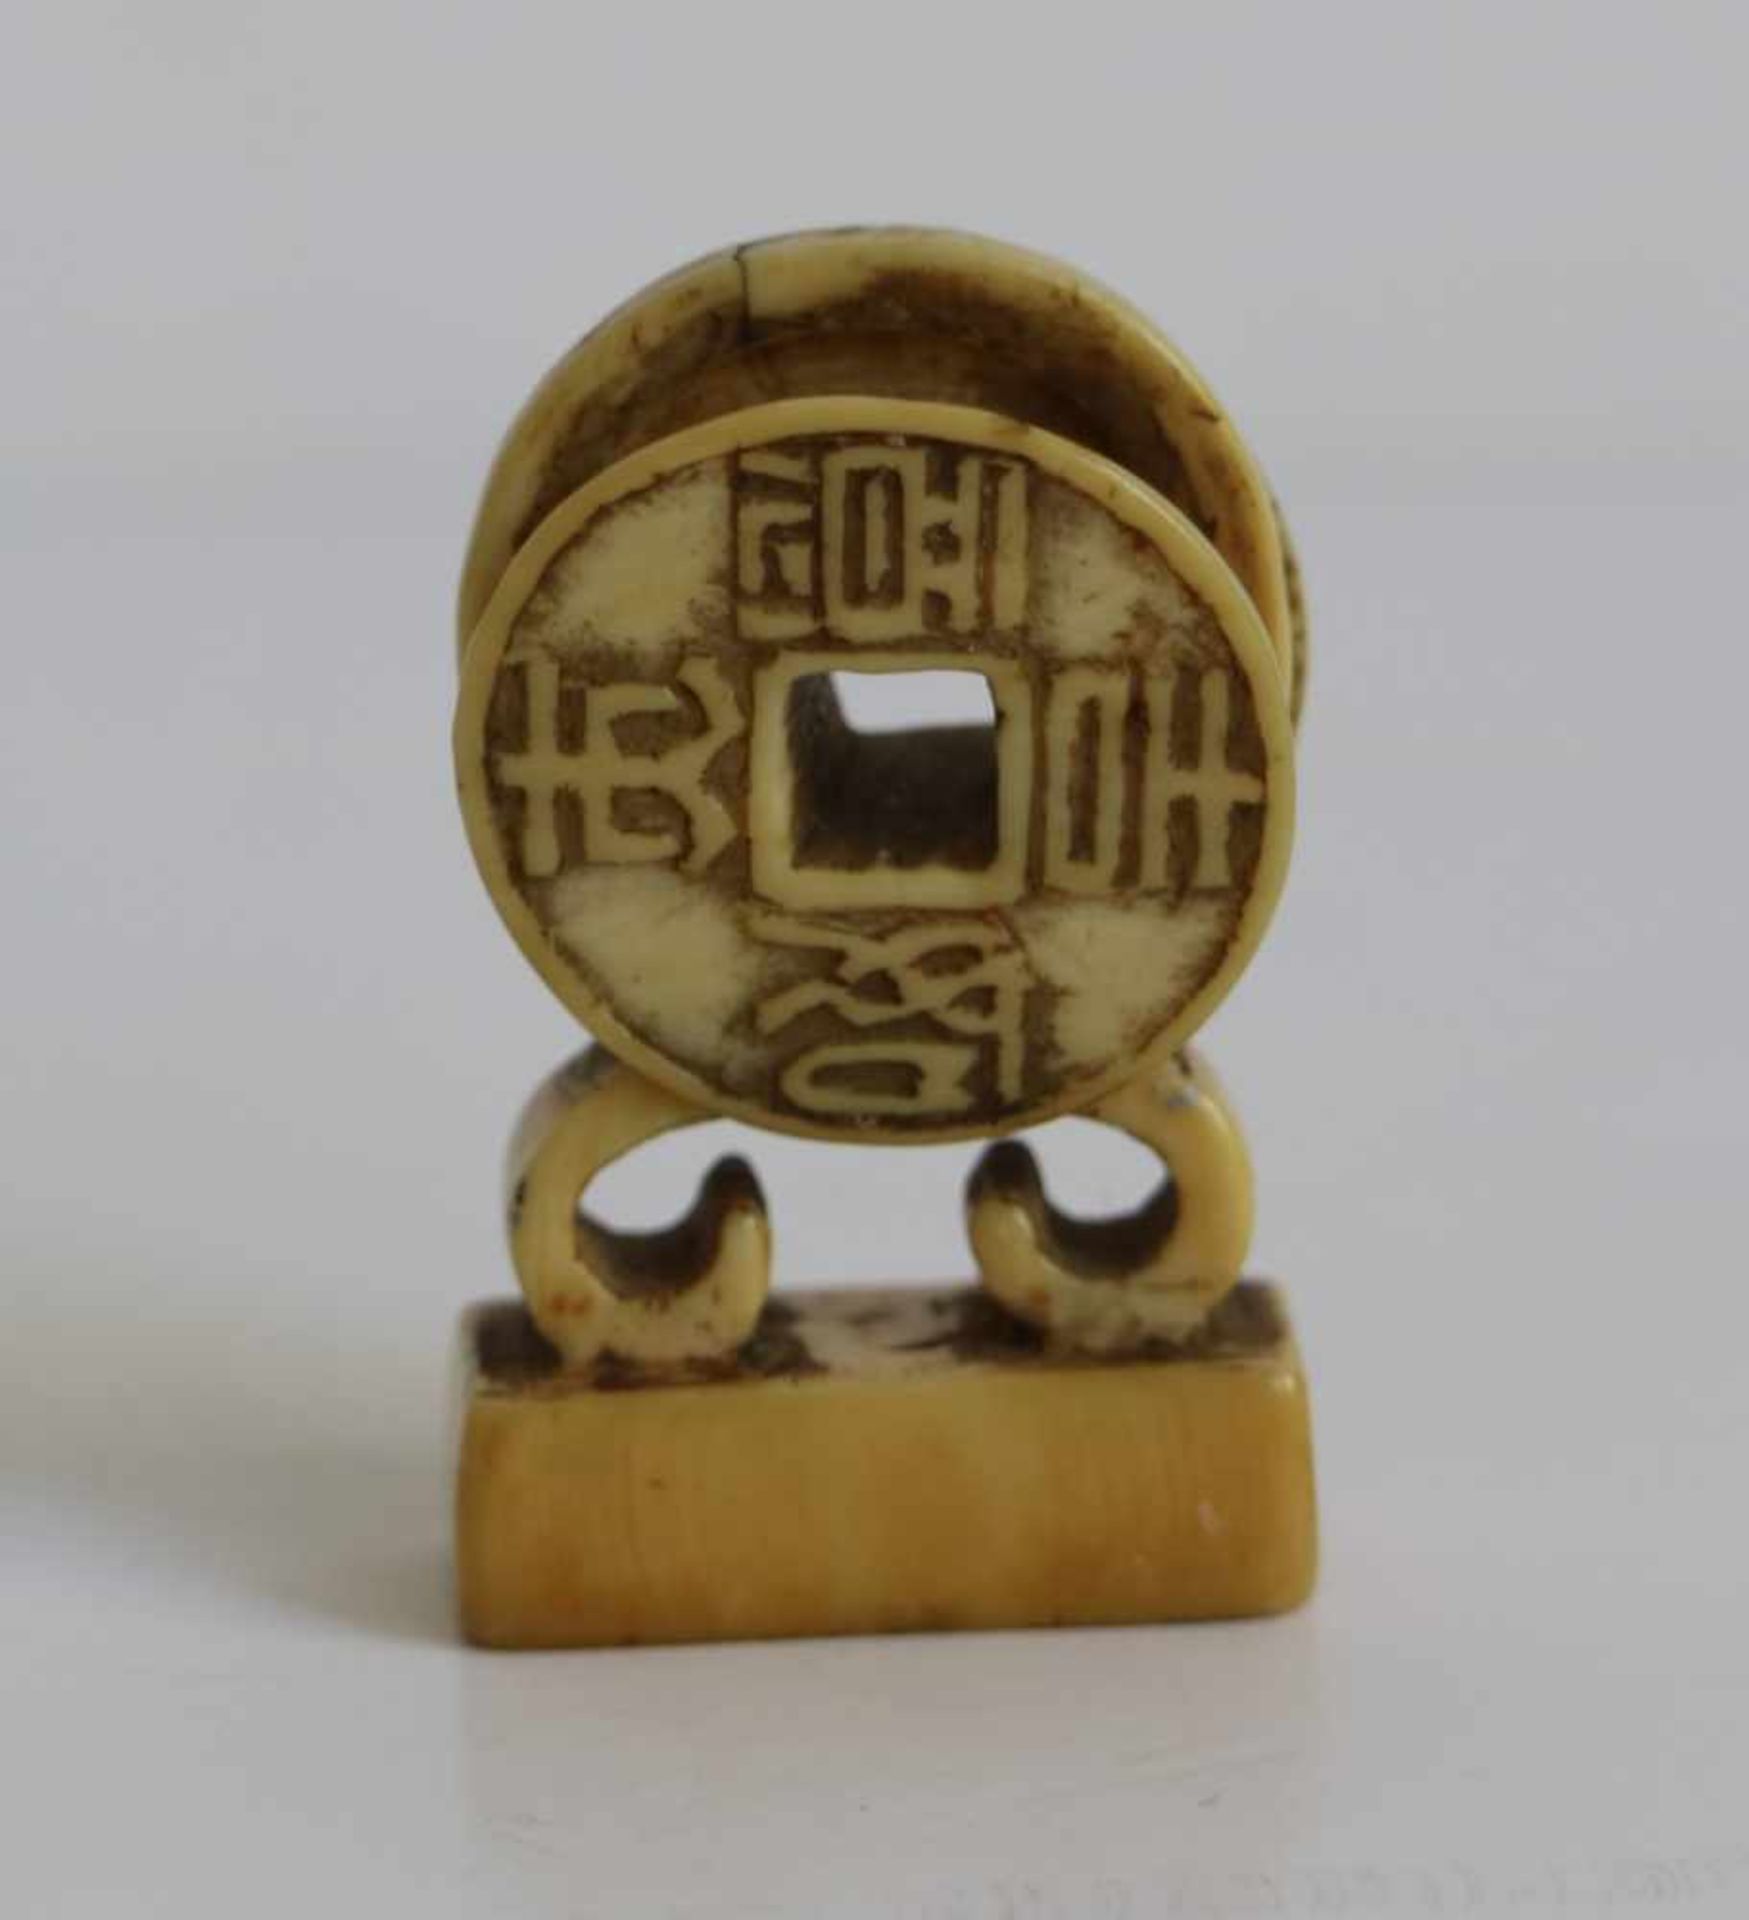 Ivory toggle and seal with loose turning disc One side reading Ji Xiang Ru yi, the other side in